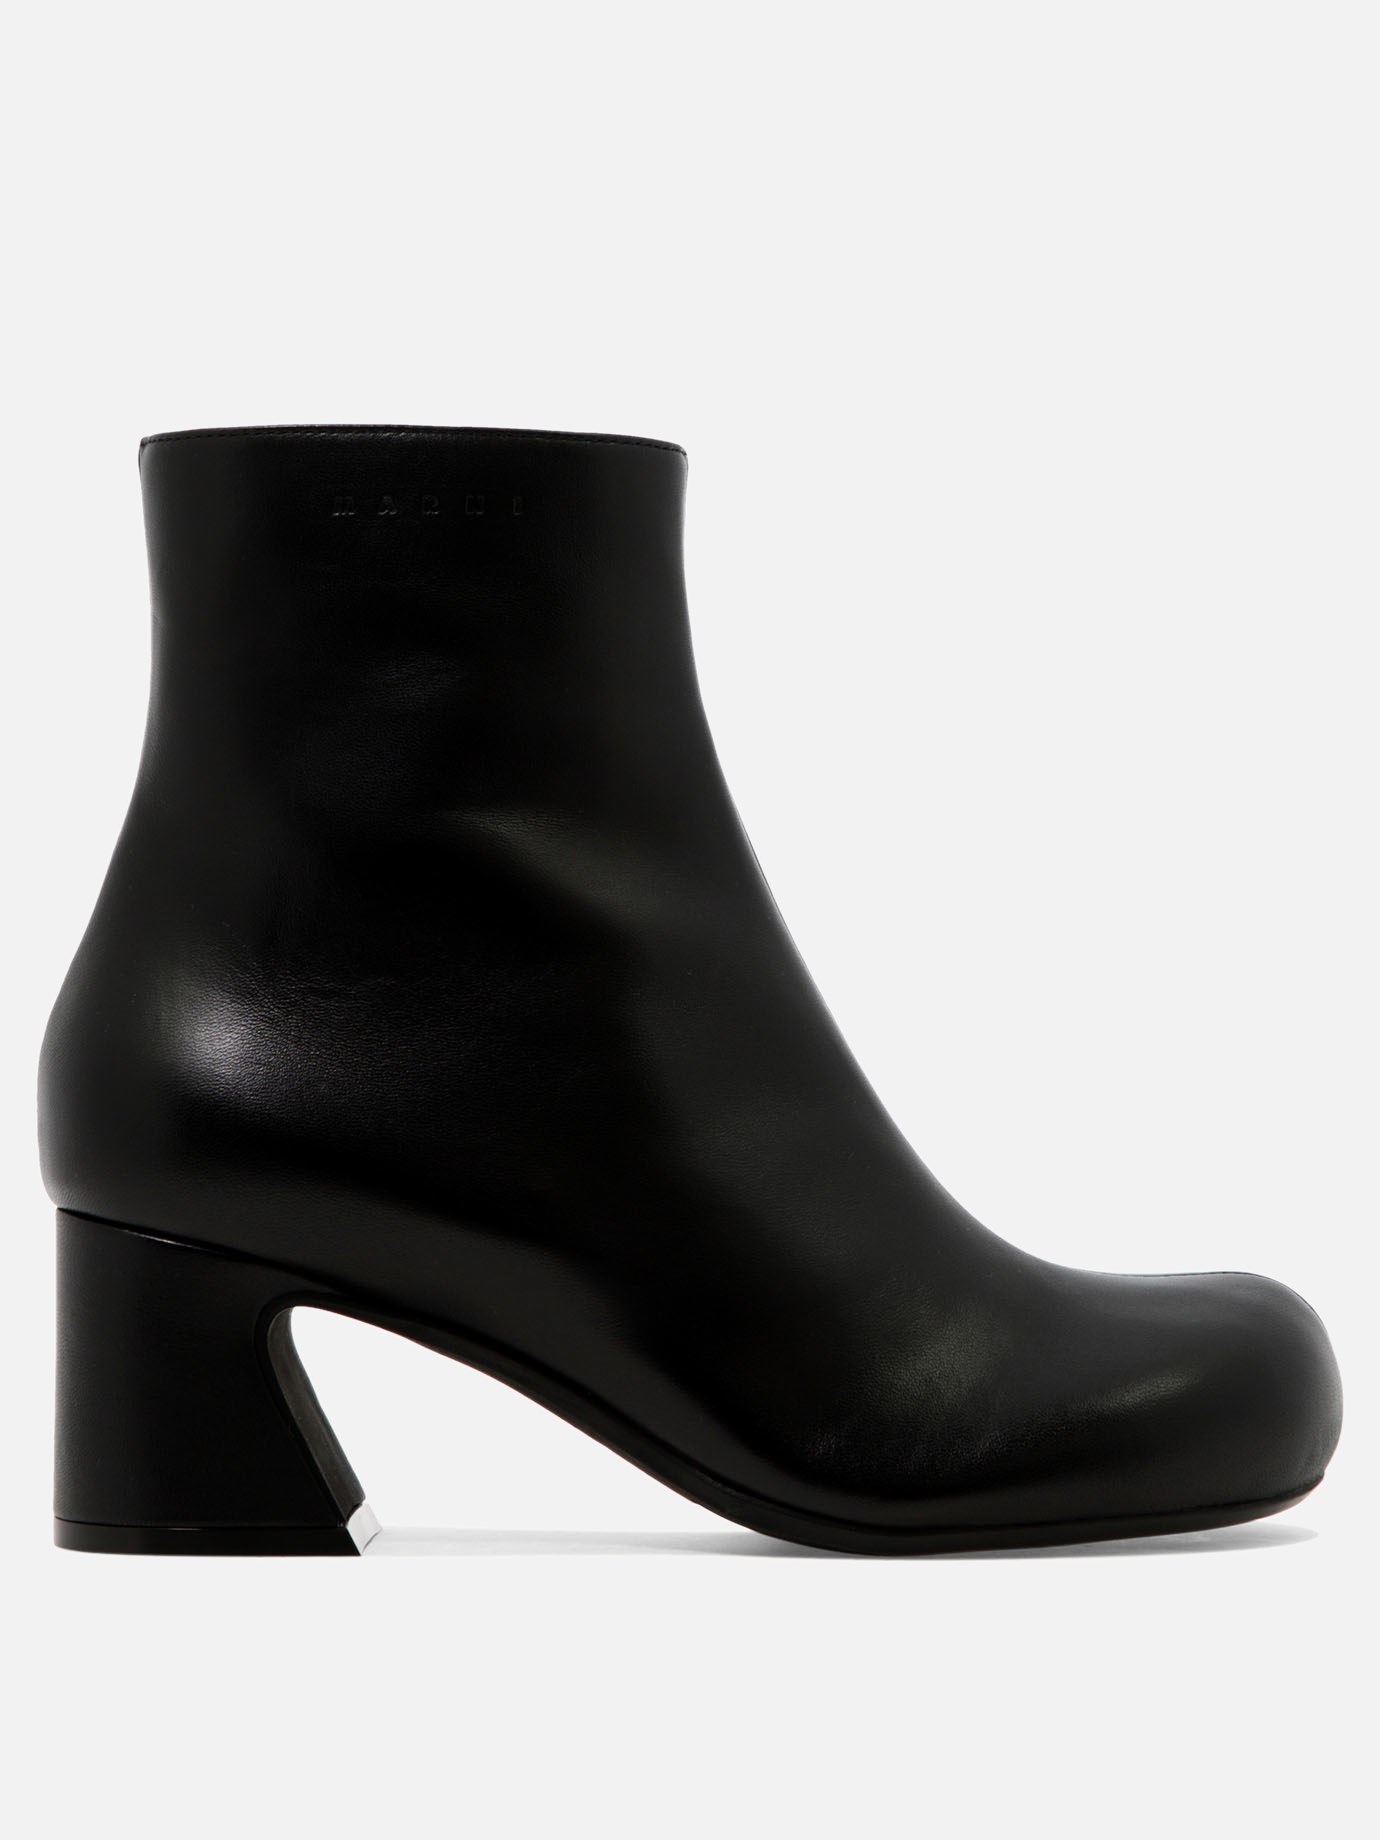 Ankle boots with shaped heelby Marni - 0